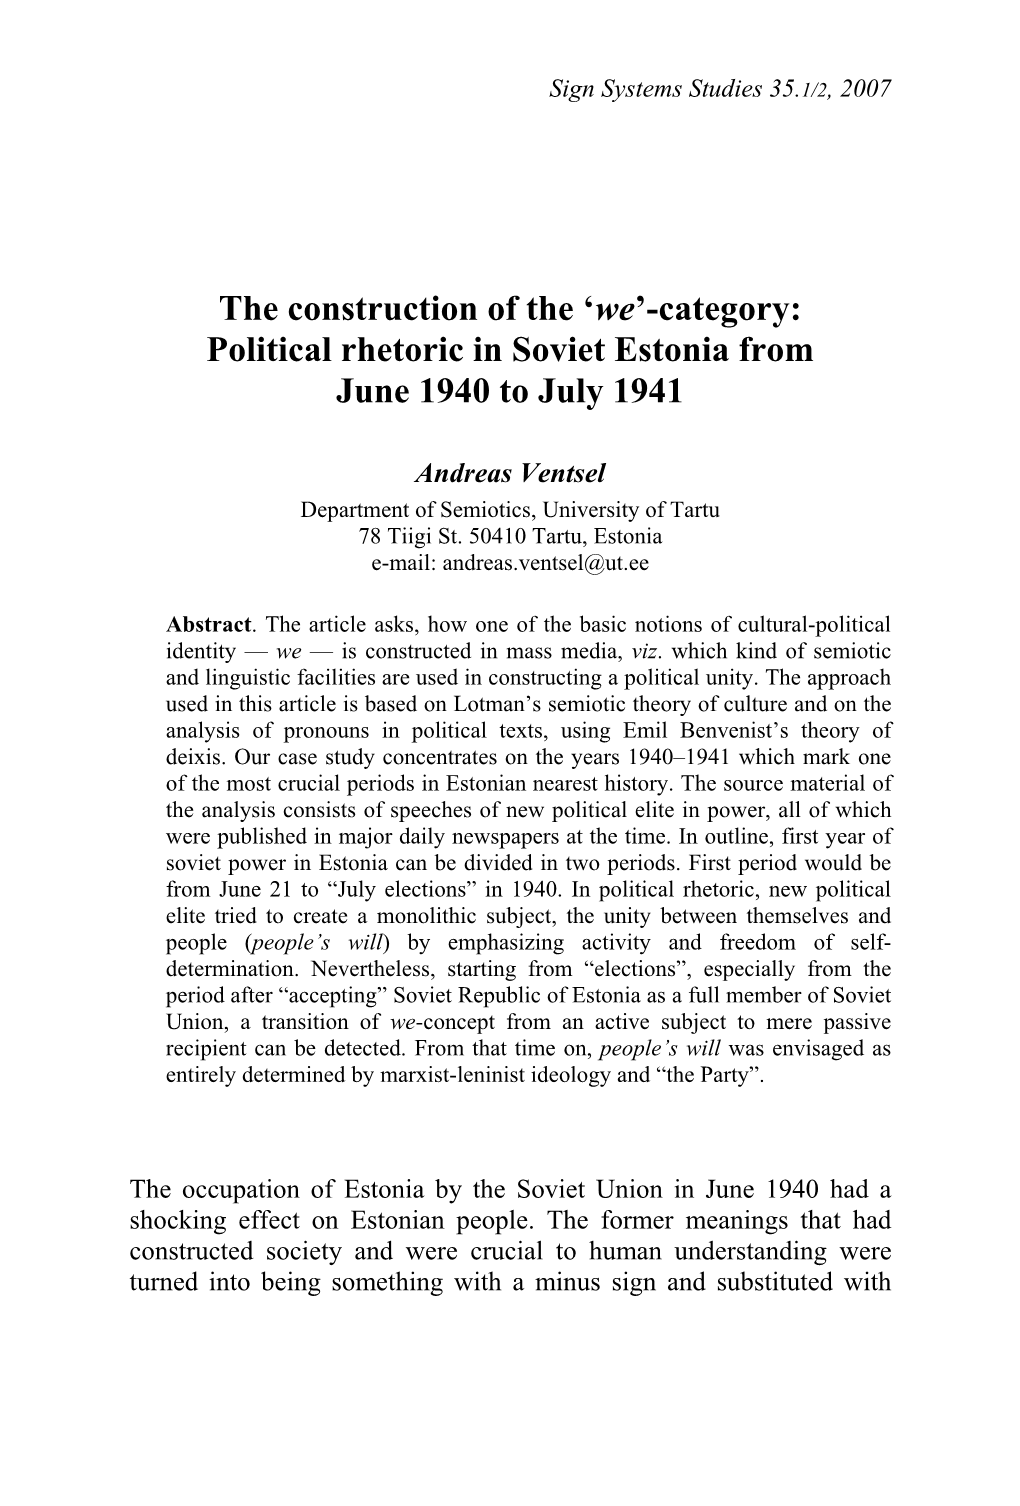 The Construction of the 'We'-Category: Political Rhetoric in Soviet Estonia from June 1940 to July 1941